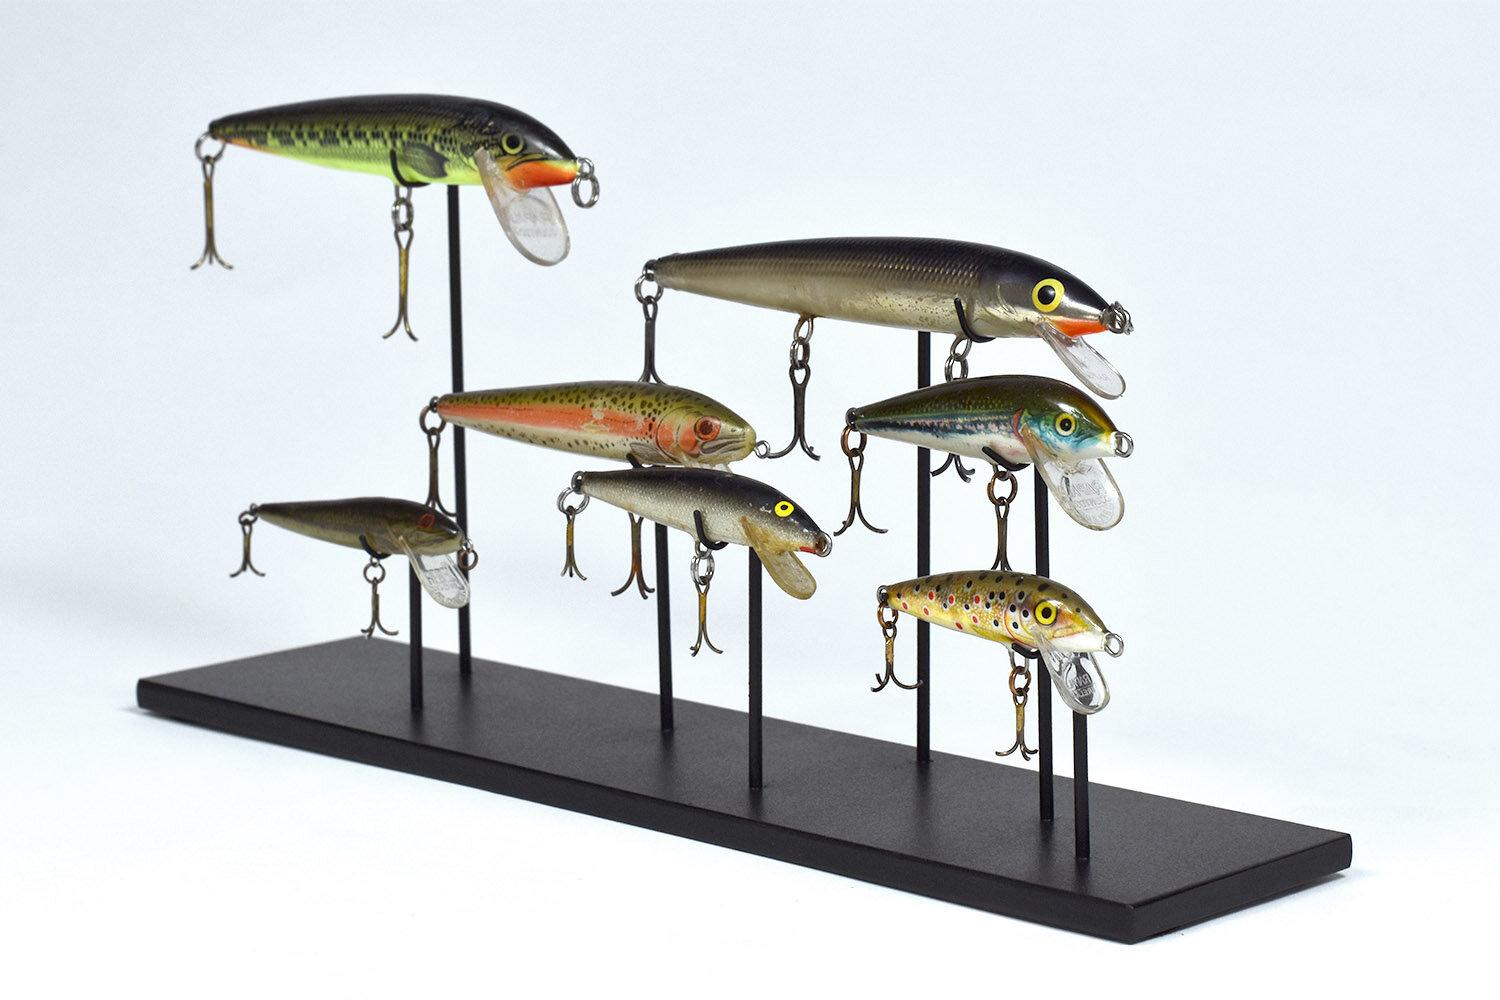 Other Group of Seven Freshwater Fishing Lures Collected from Lake Tahoe California